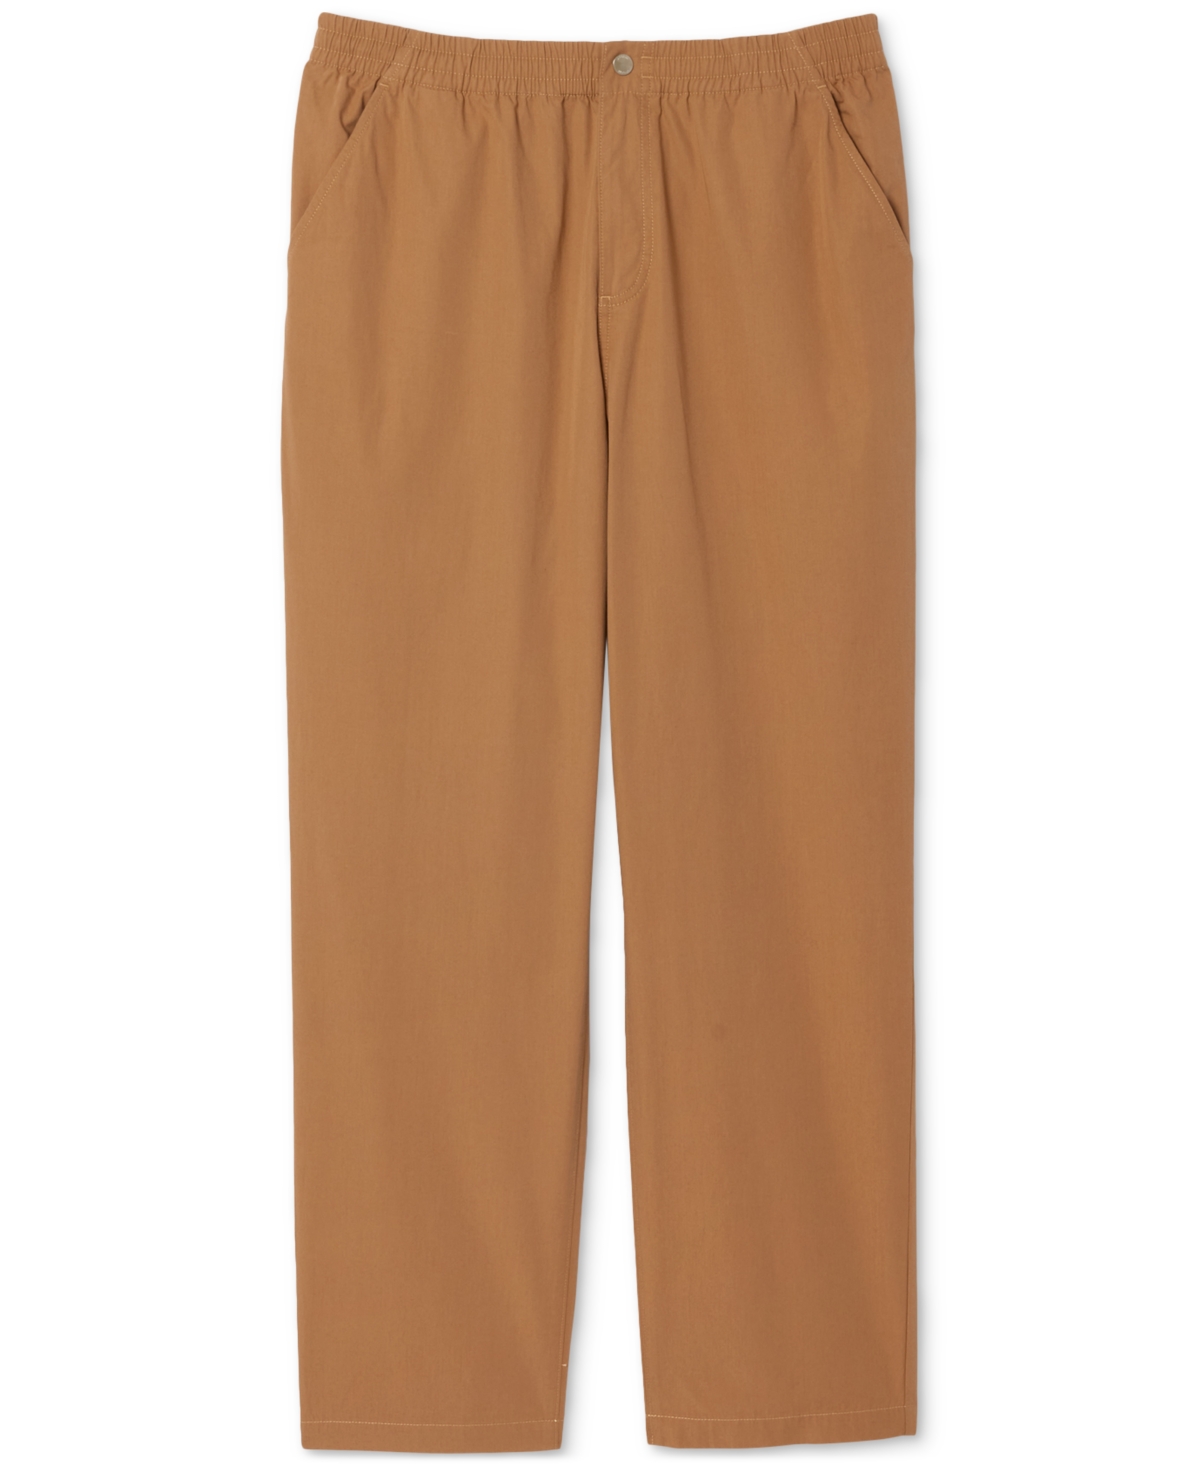 Lacoste Men's Relaxed Fit Track Pants In It5 Sand